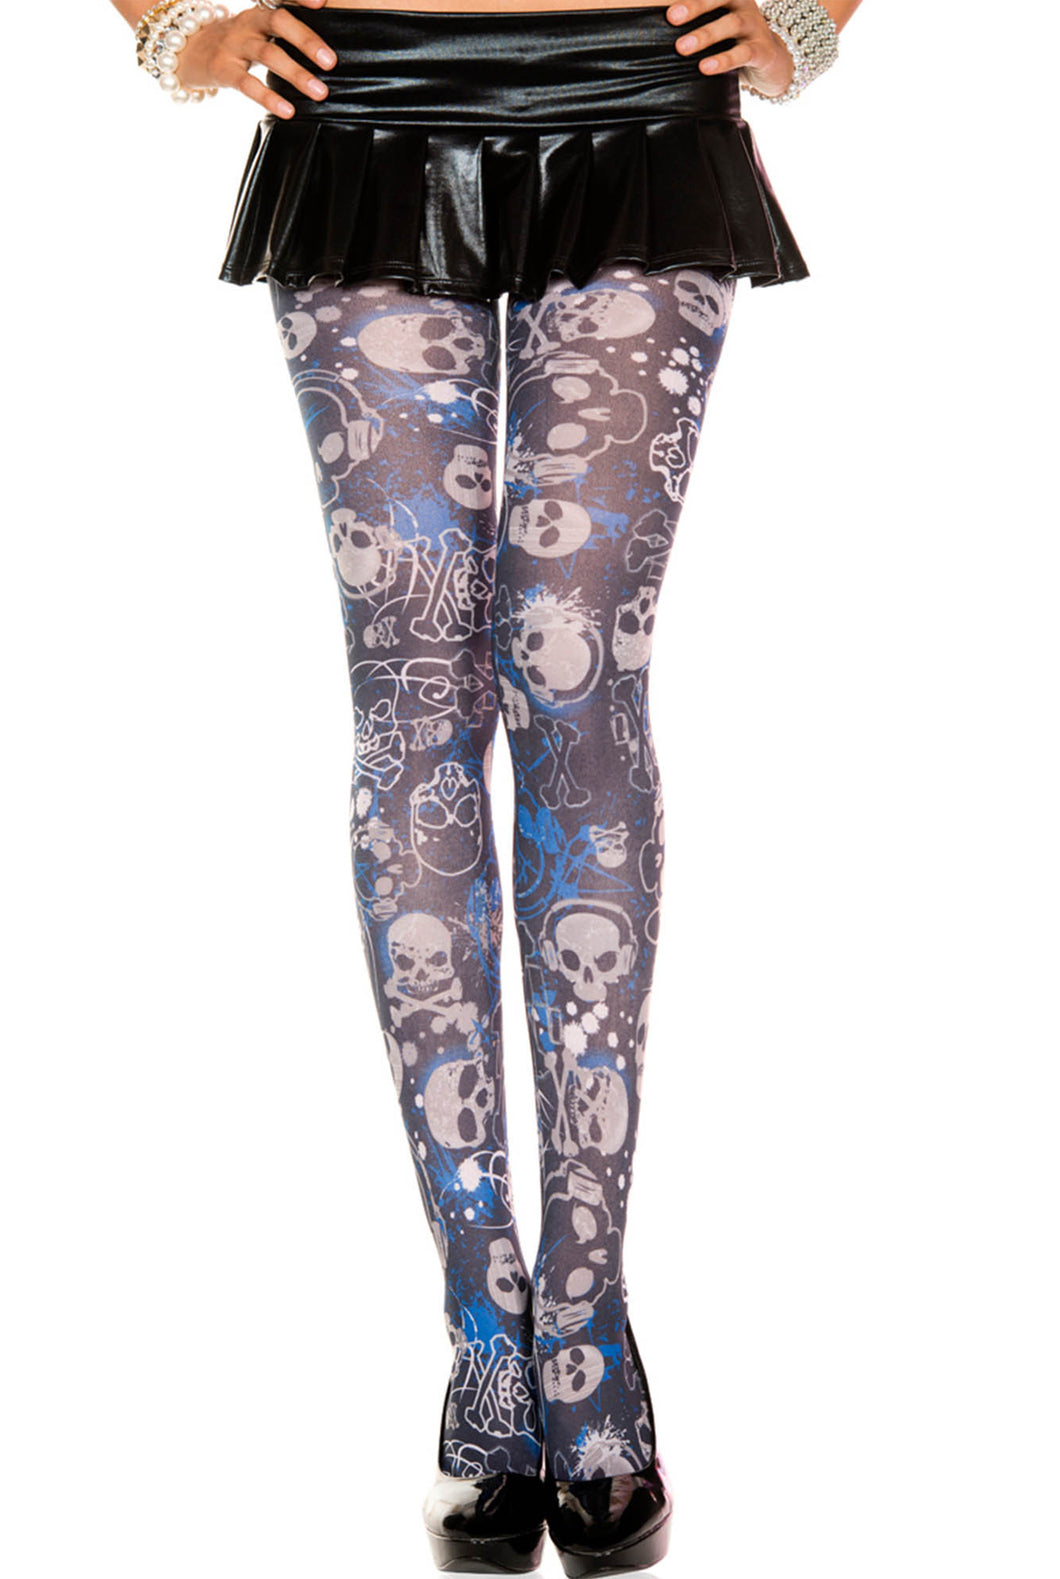 Gothic graphic opaque pantyhose